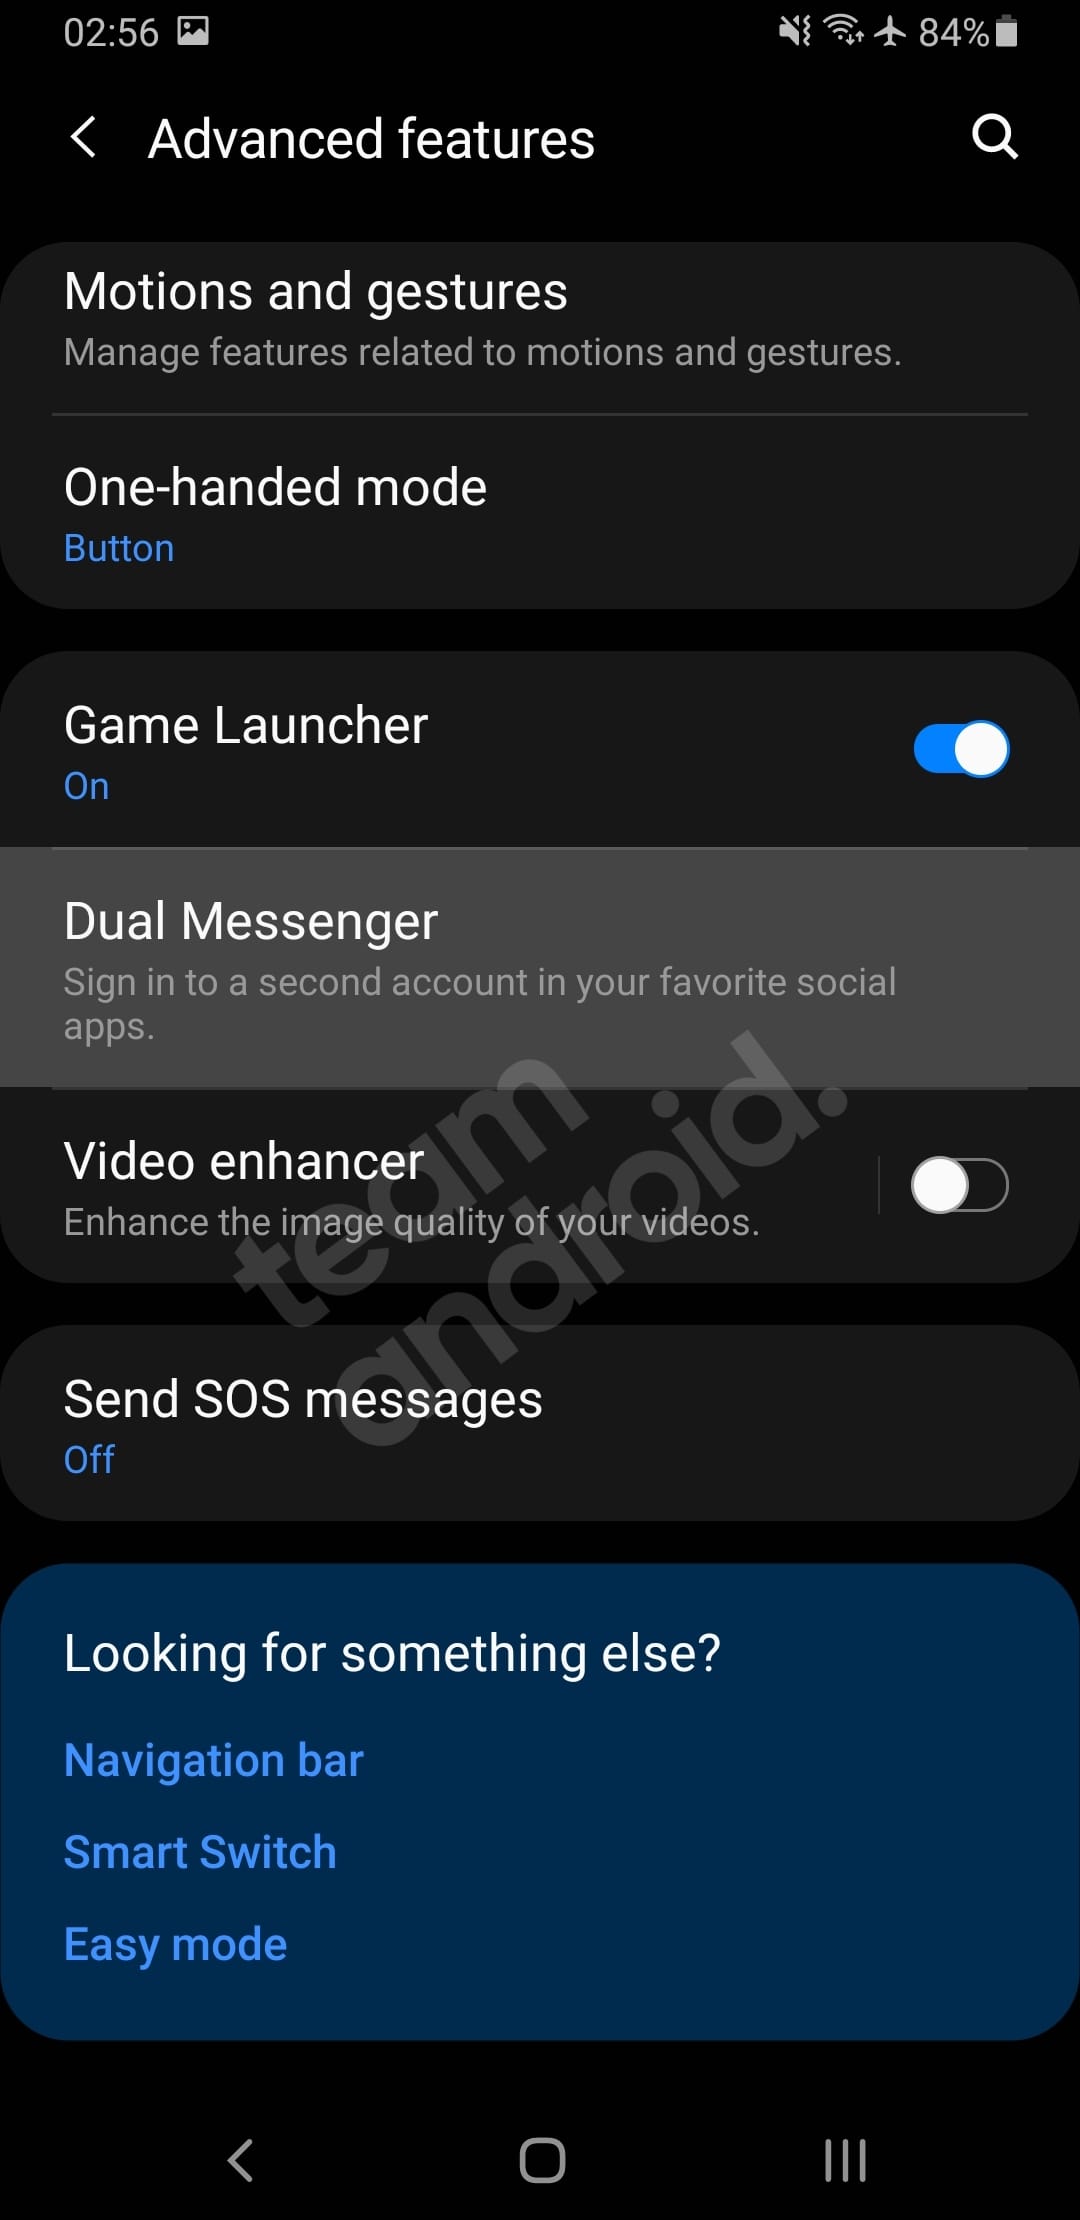 How to Set Up Dual Messenger on Samsung